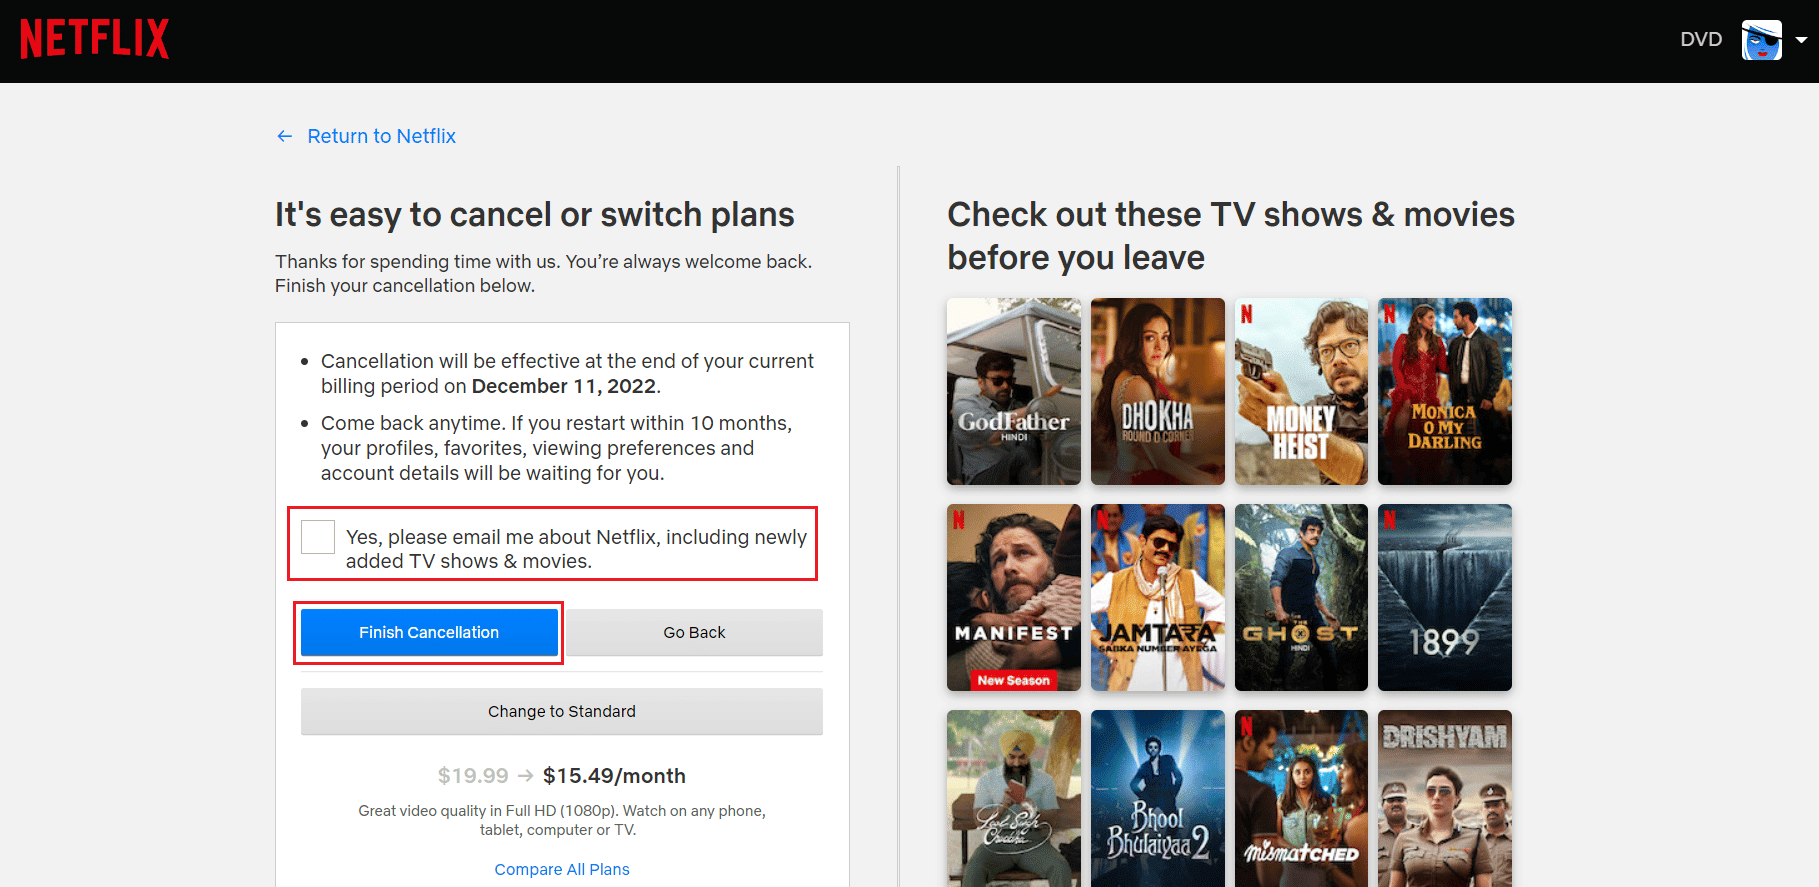 Mark the checkbox to receive all news about Netflix, if you want, and click on Finish Cancellation